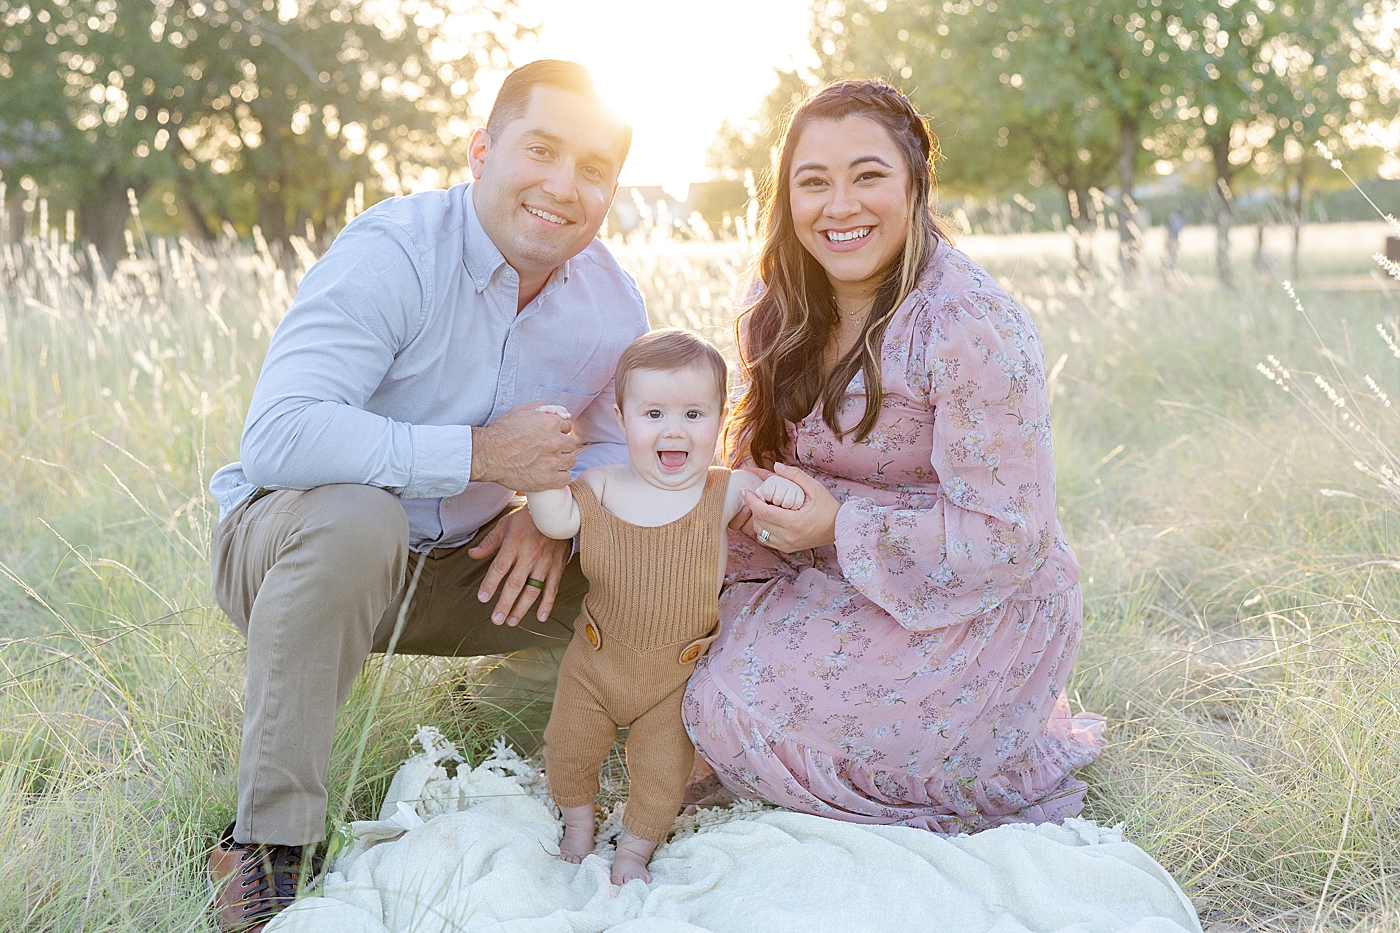 Mom and dad sitting in the grass with their baby during Six Month Milestone Session | Image by Sana Ahmed Photography